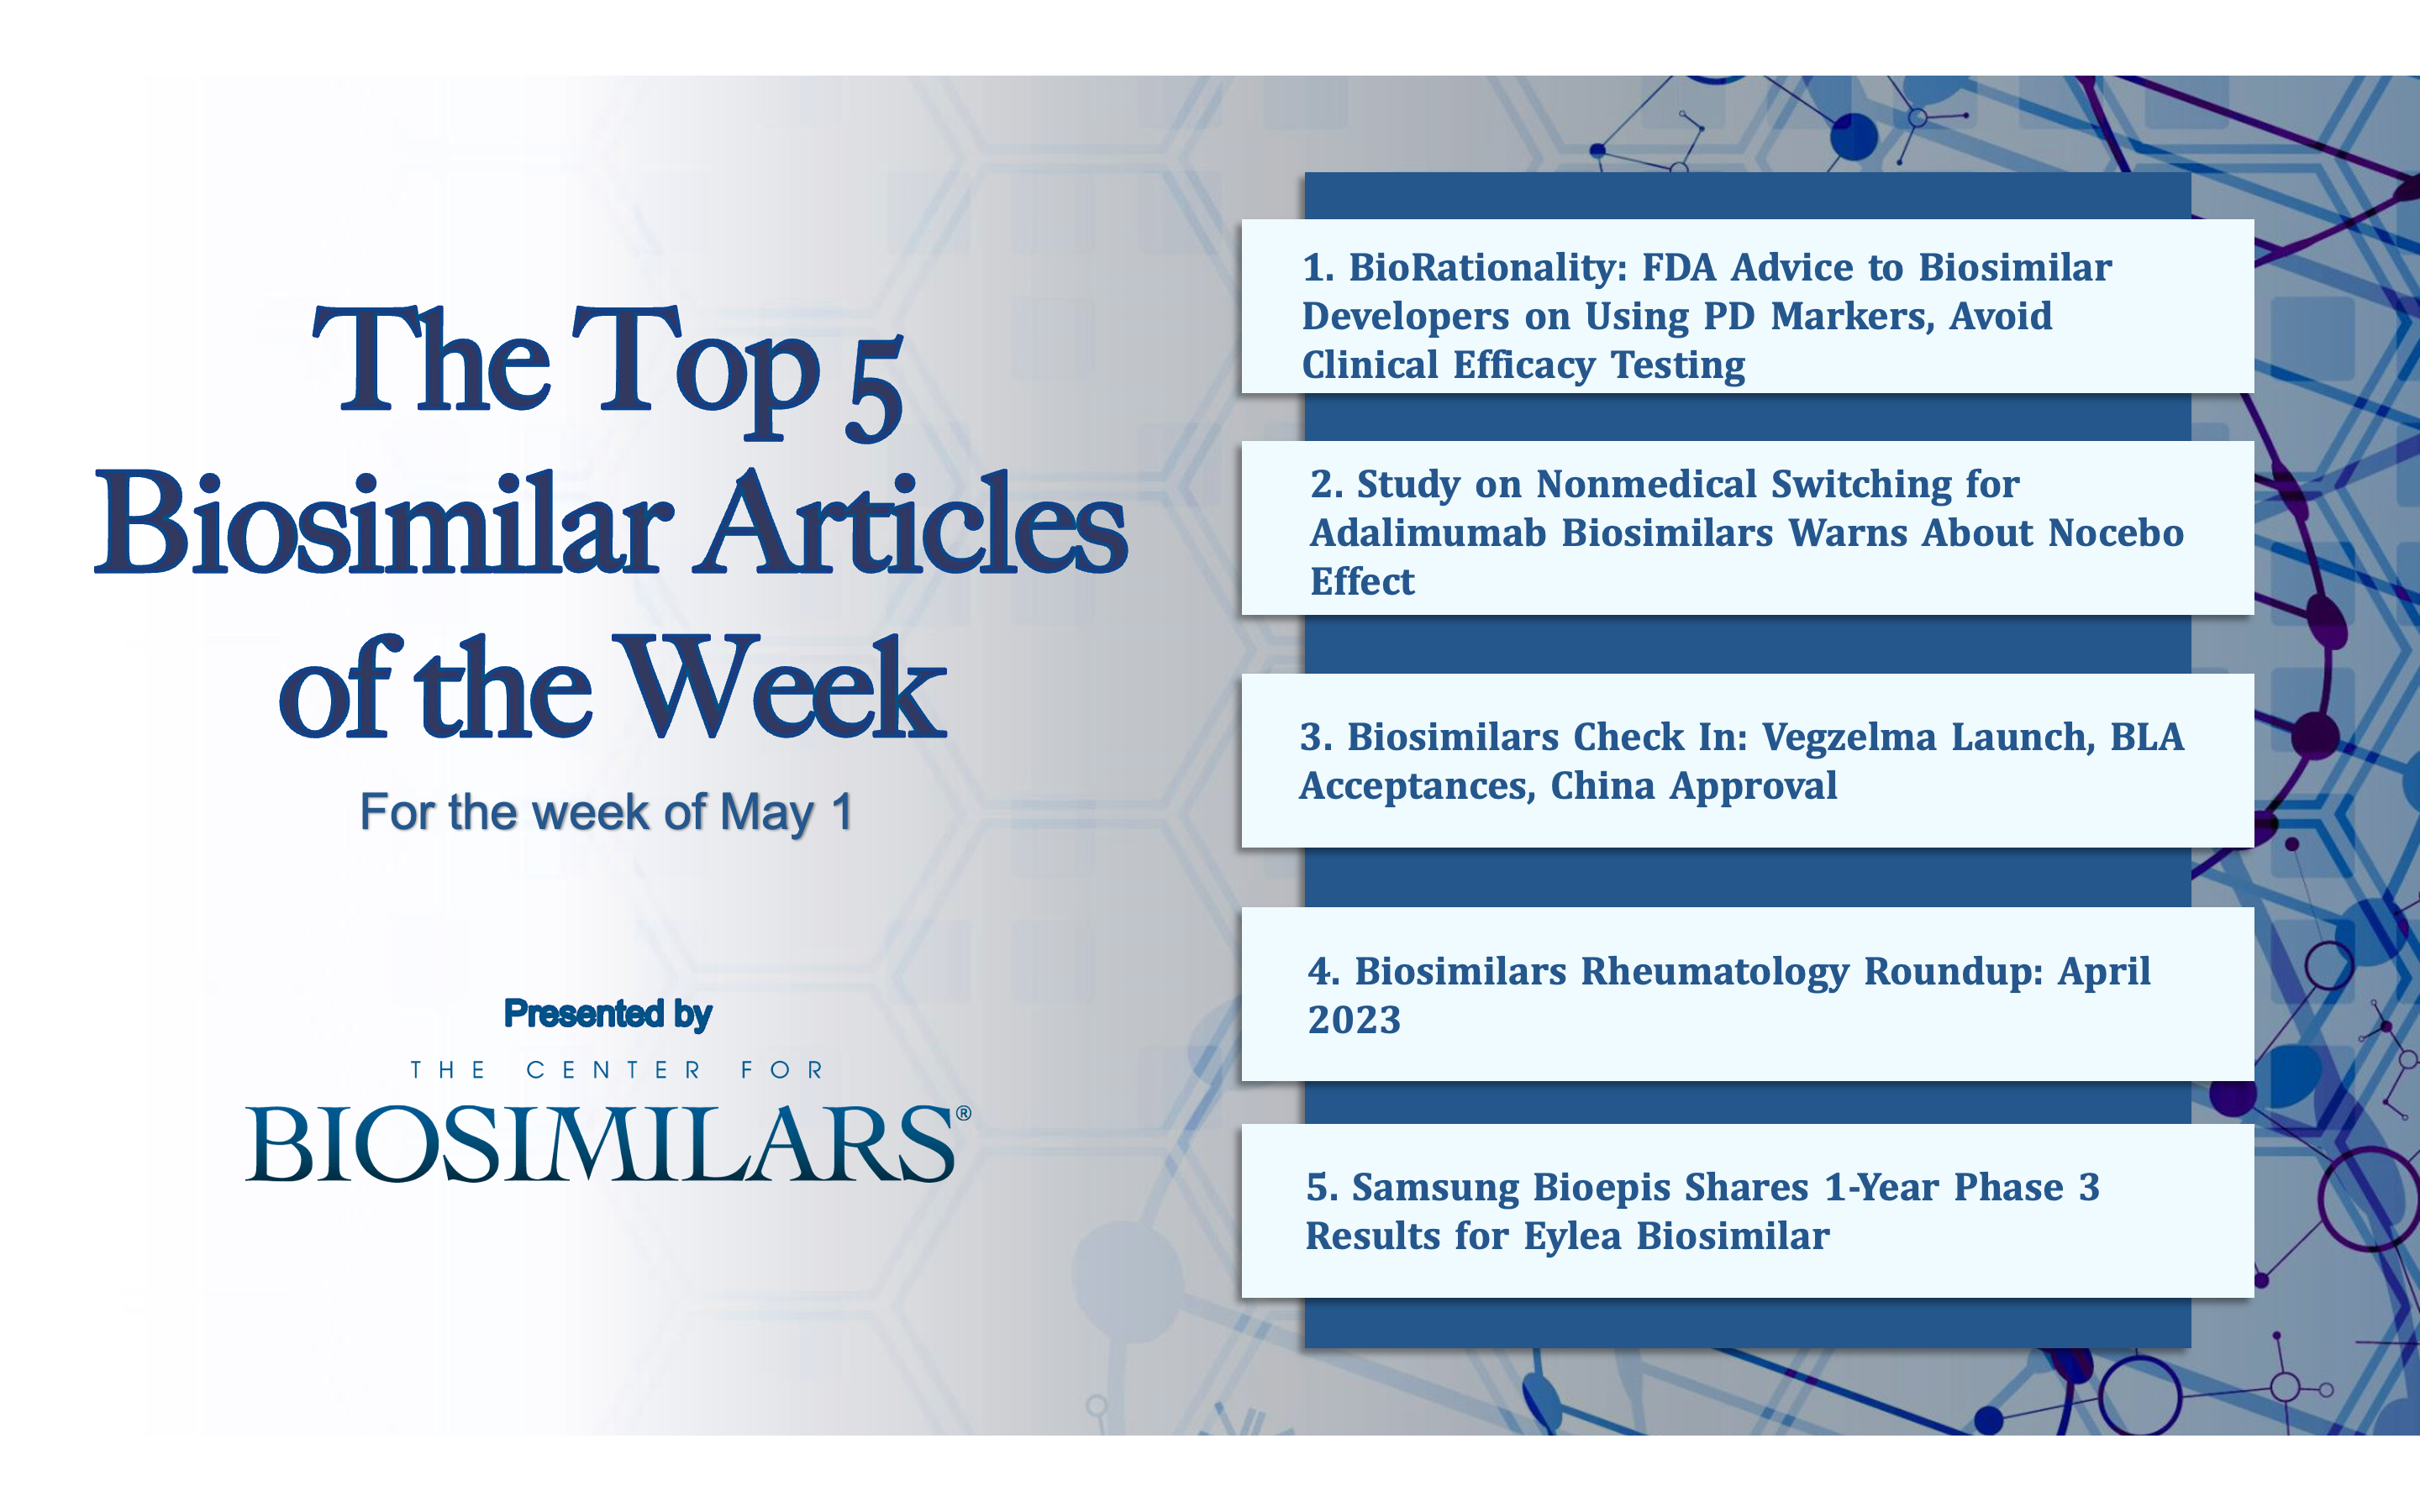 Here are the top 5 biosimilar articles for the week of May 1, 2023.